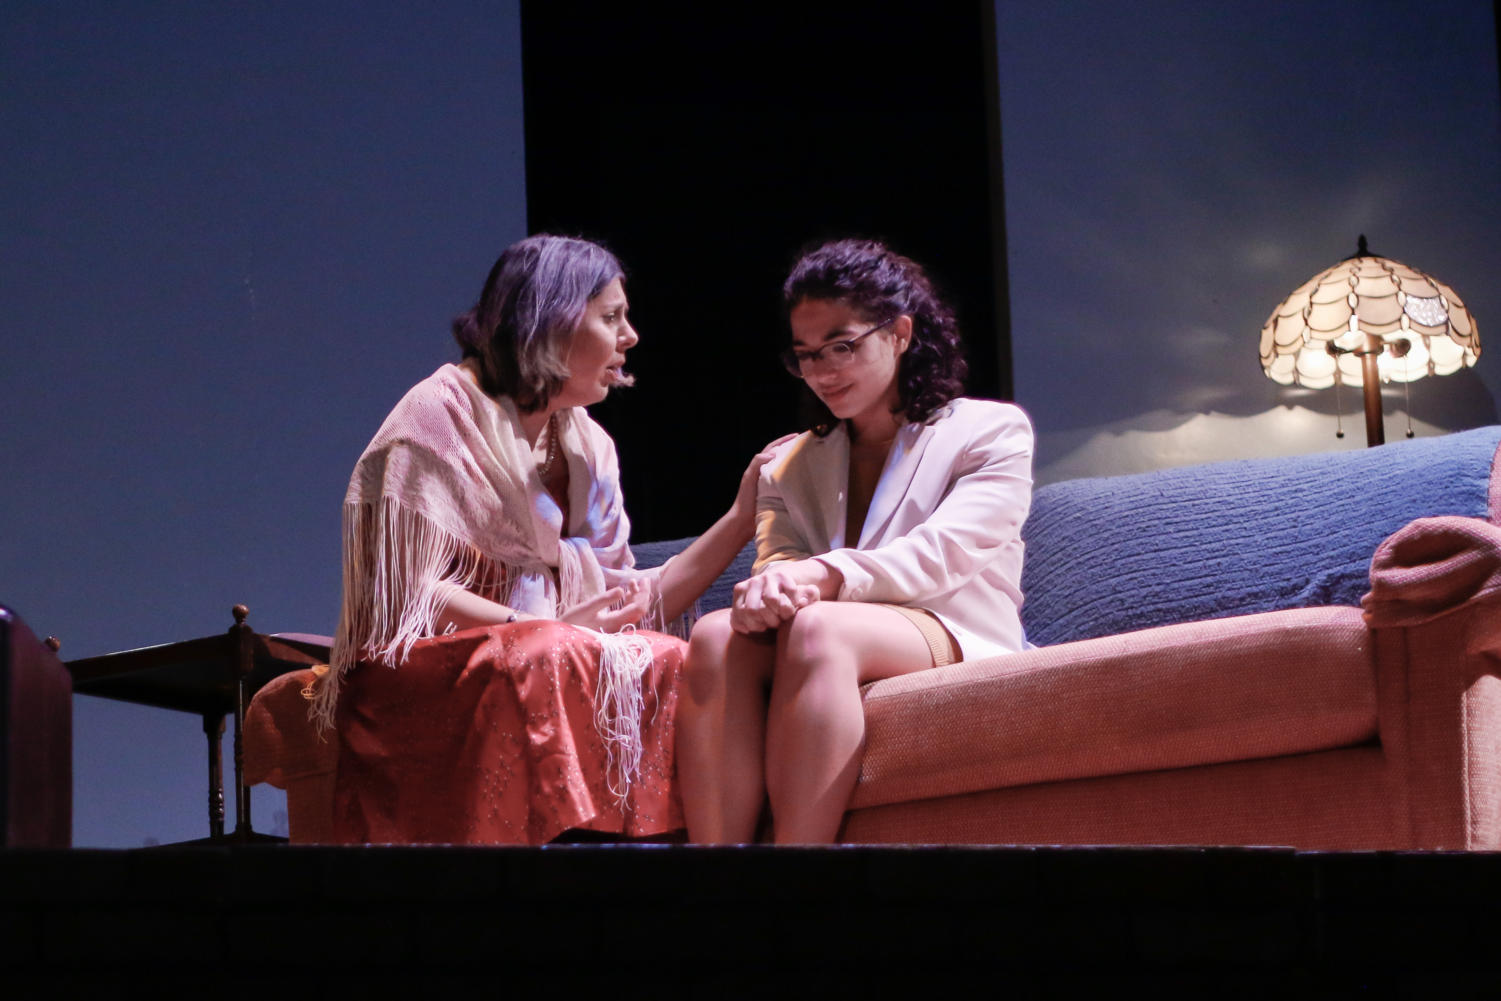 Emma explains to her grandmother (played by fourth-year Melissa Needlman) the conclusions she has reached after much soul-searching.